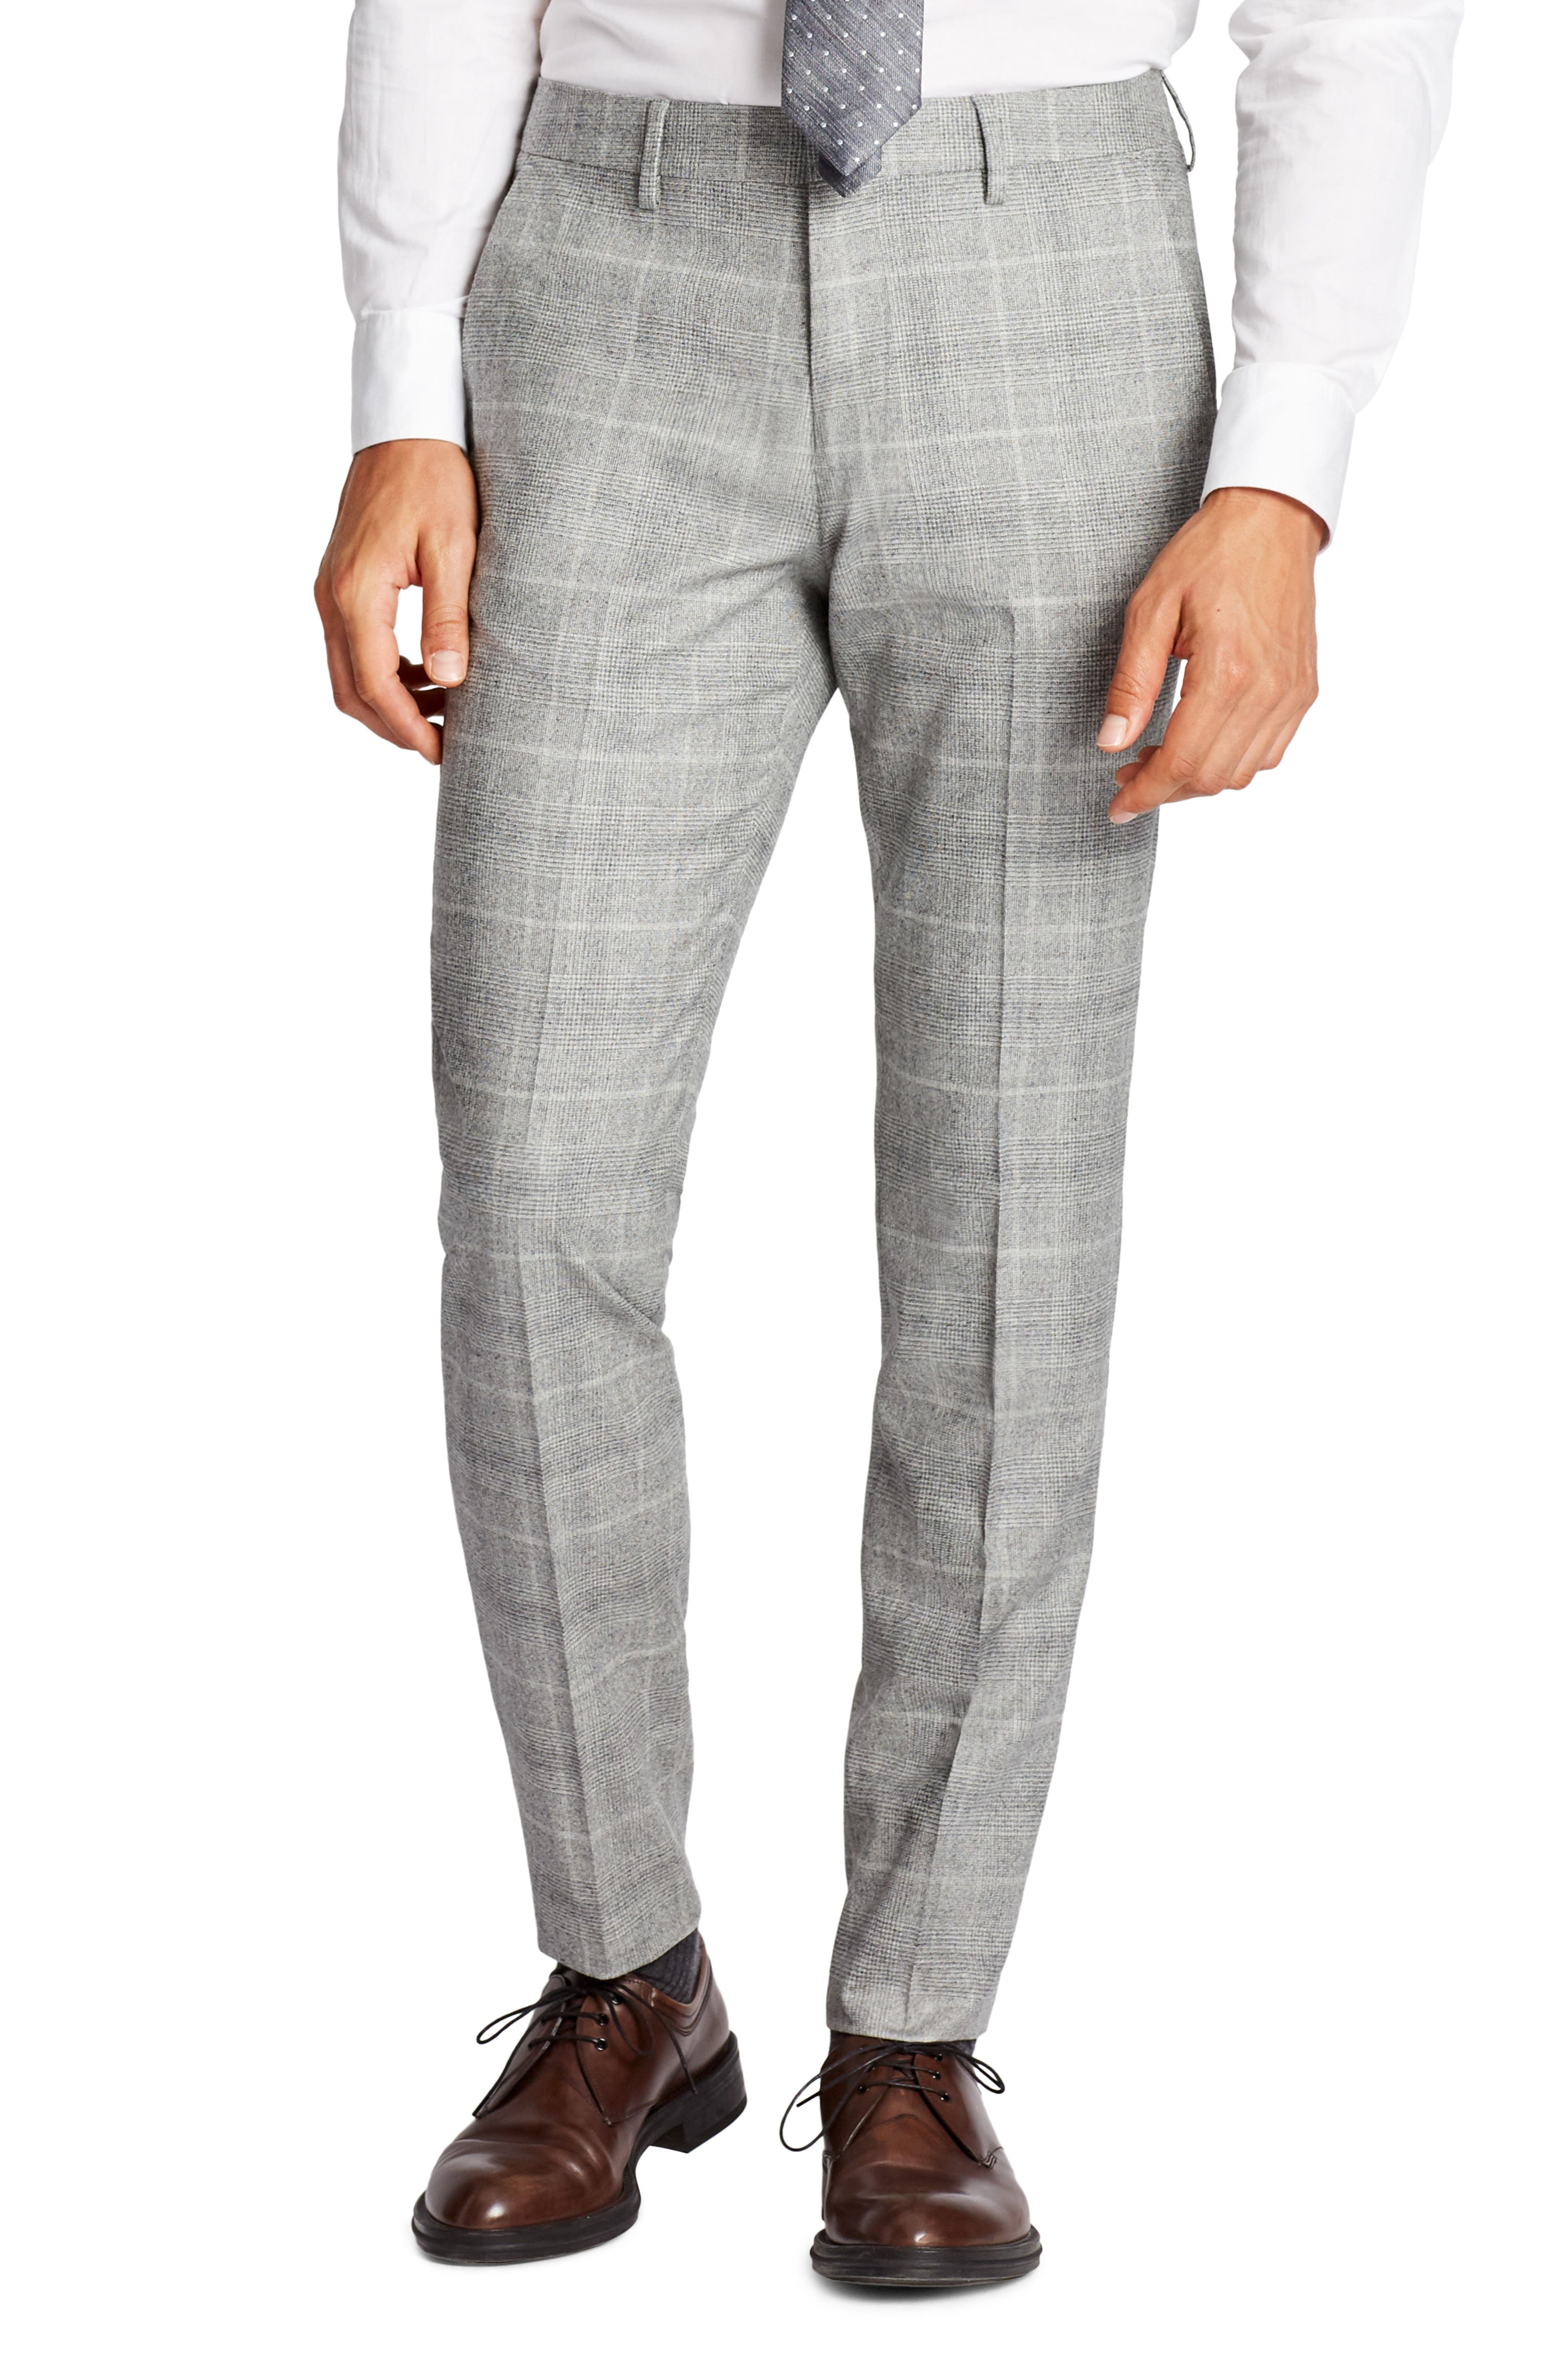 Bonobos Jetsetter Flat Front Plaid Stretch Wool Trousers | Nordstrom